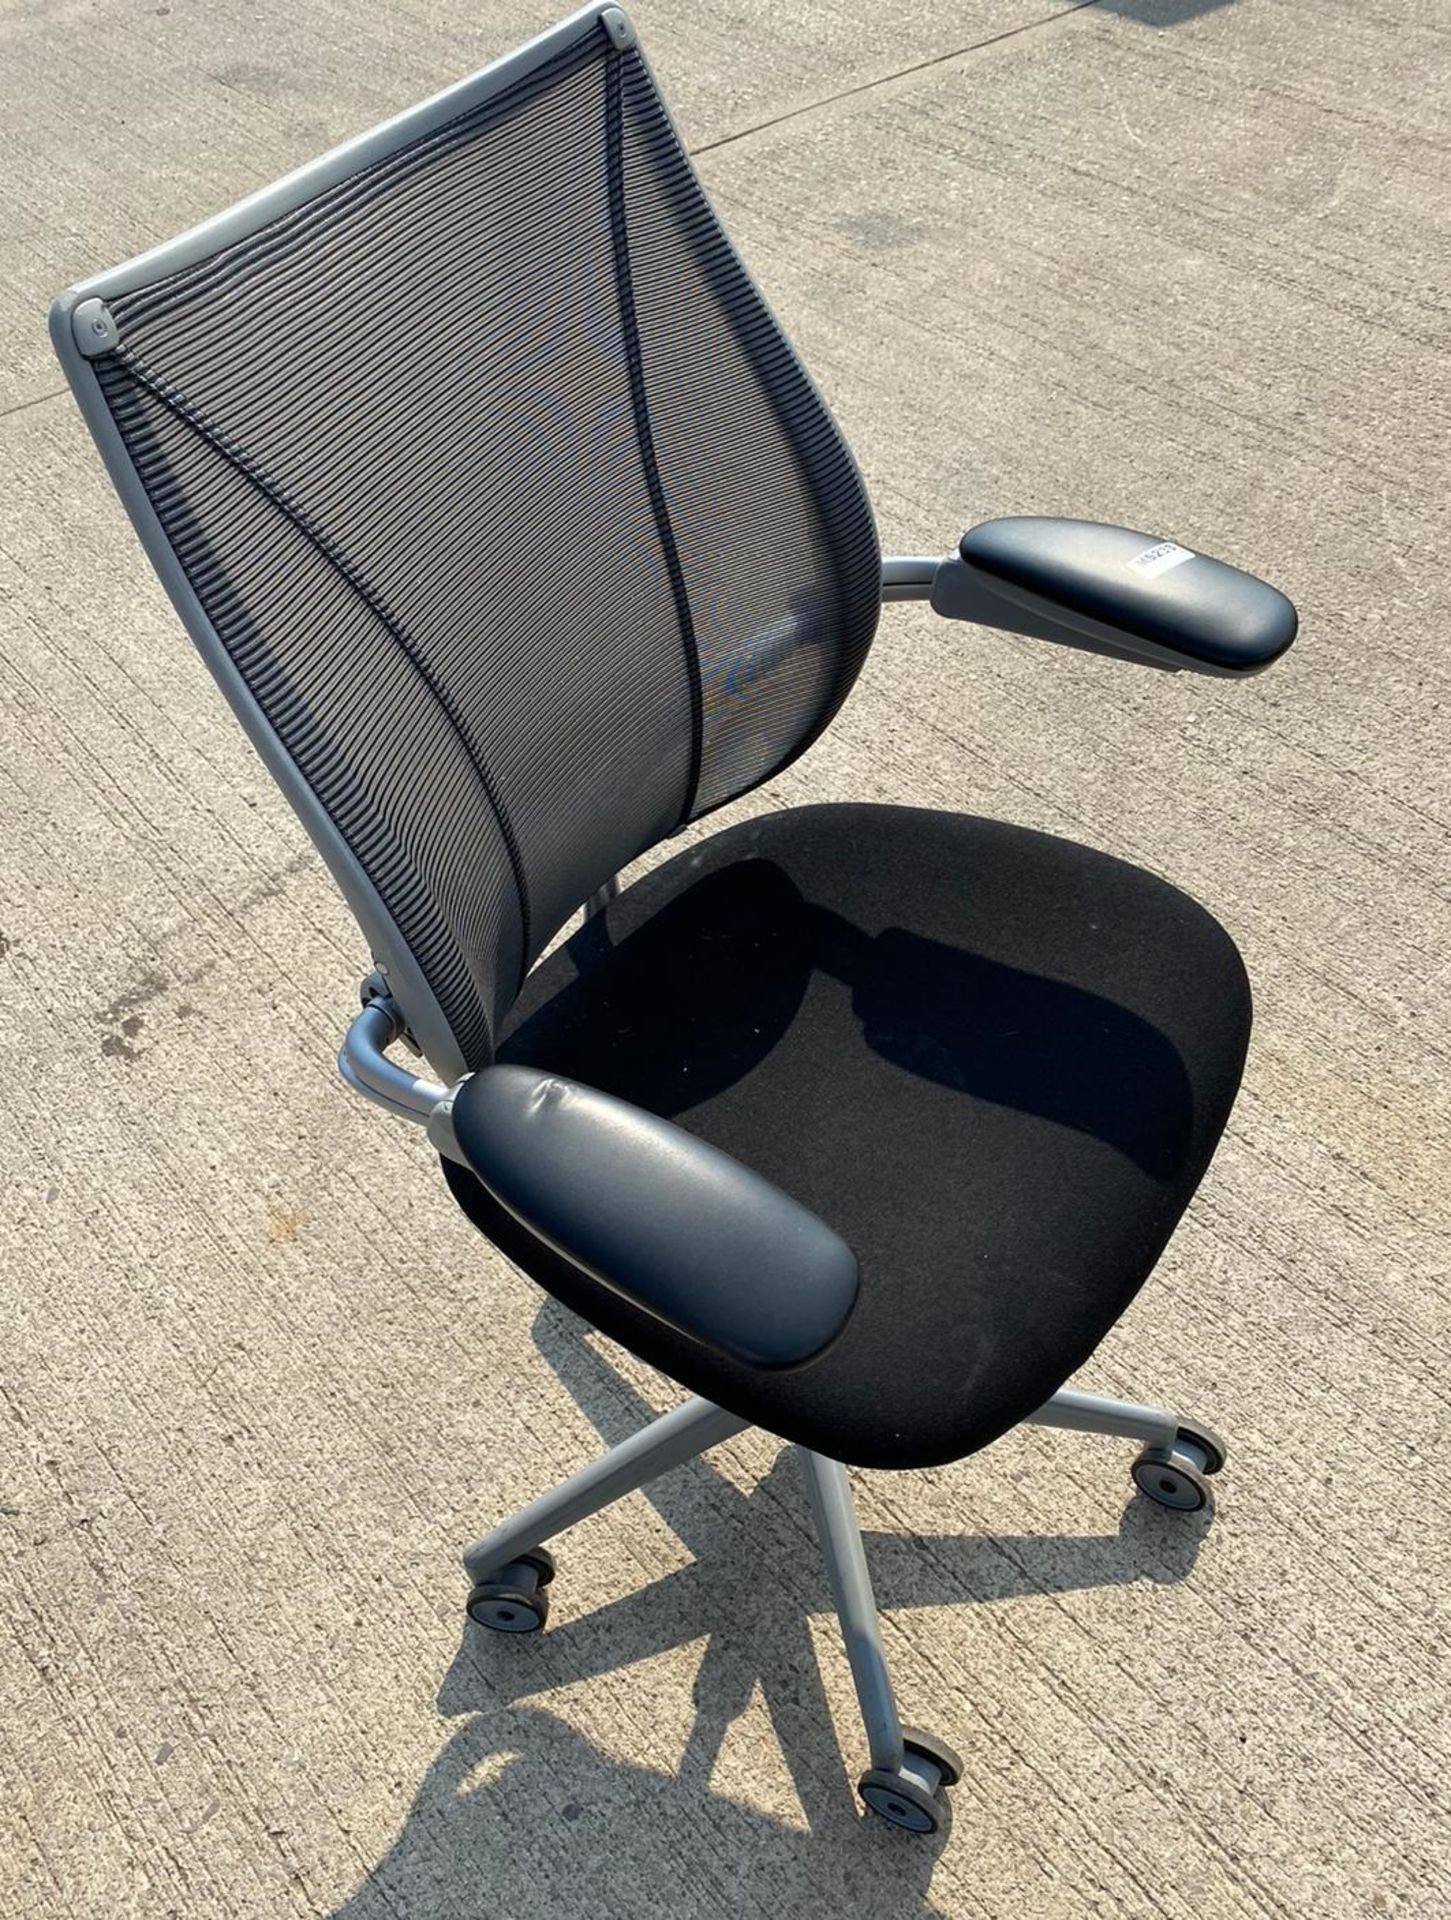 1 x Humanscale Liberty Task Chair in Black and Grey - Used Condition - Location: Altrincham WA14 - - Image 8 of 11